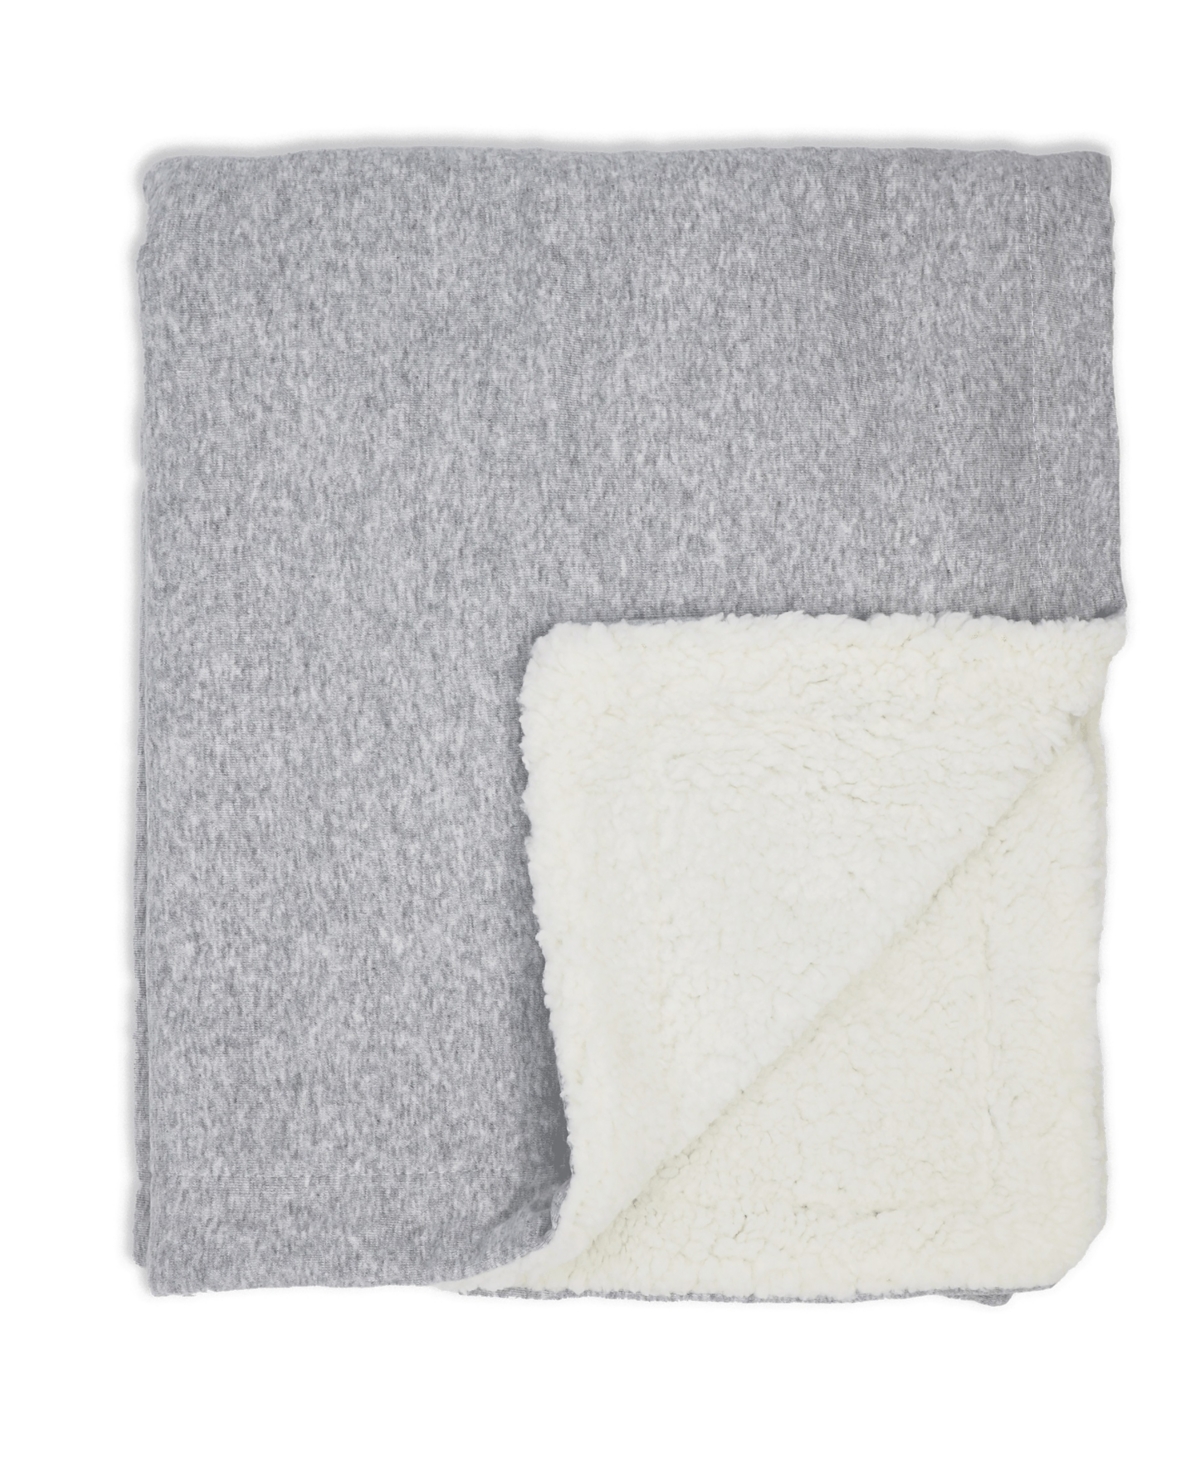 3 Stories Trading Baby Boys And Baby Girls Jersey Knit Blanket With Sherpa In Gray